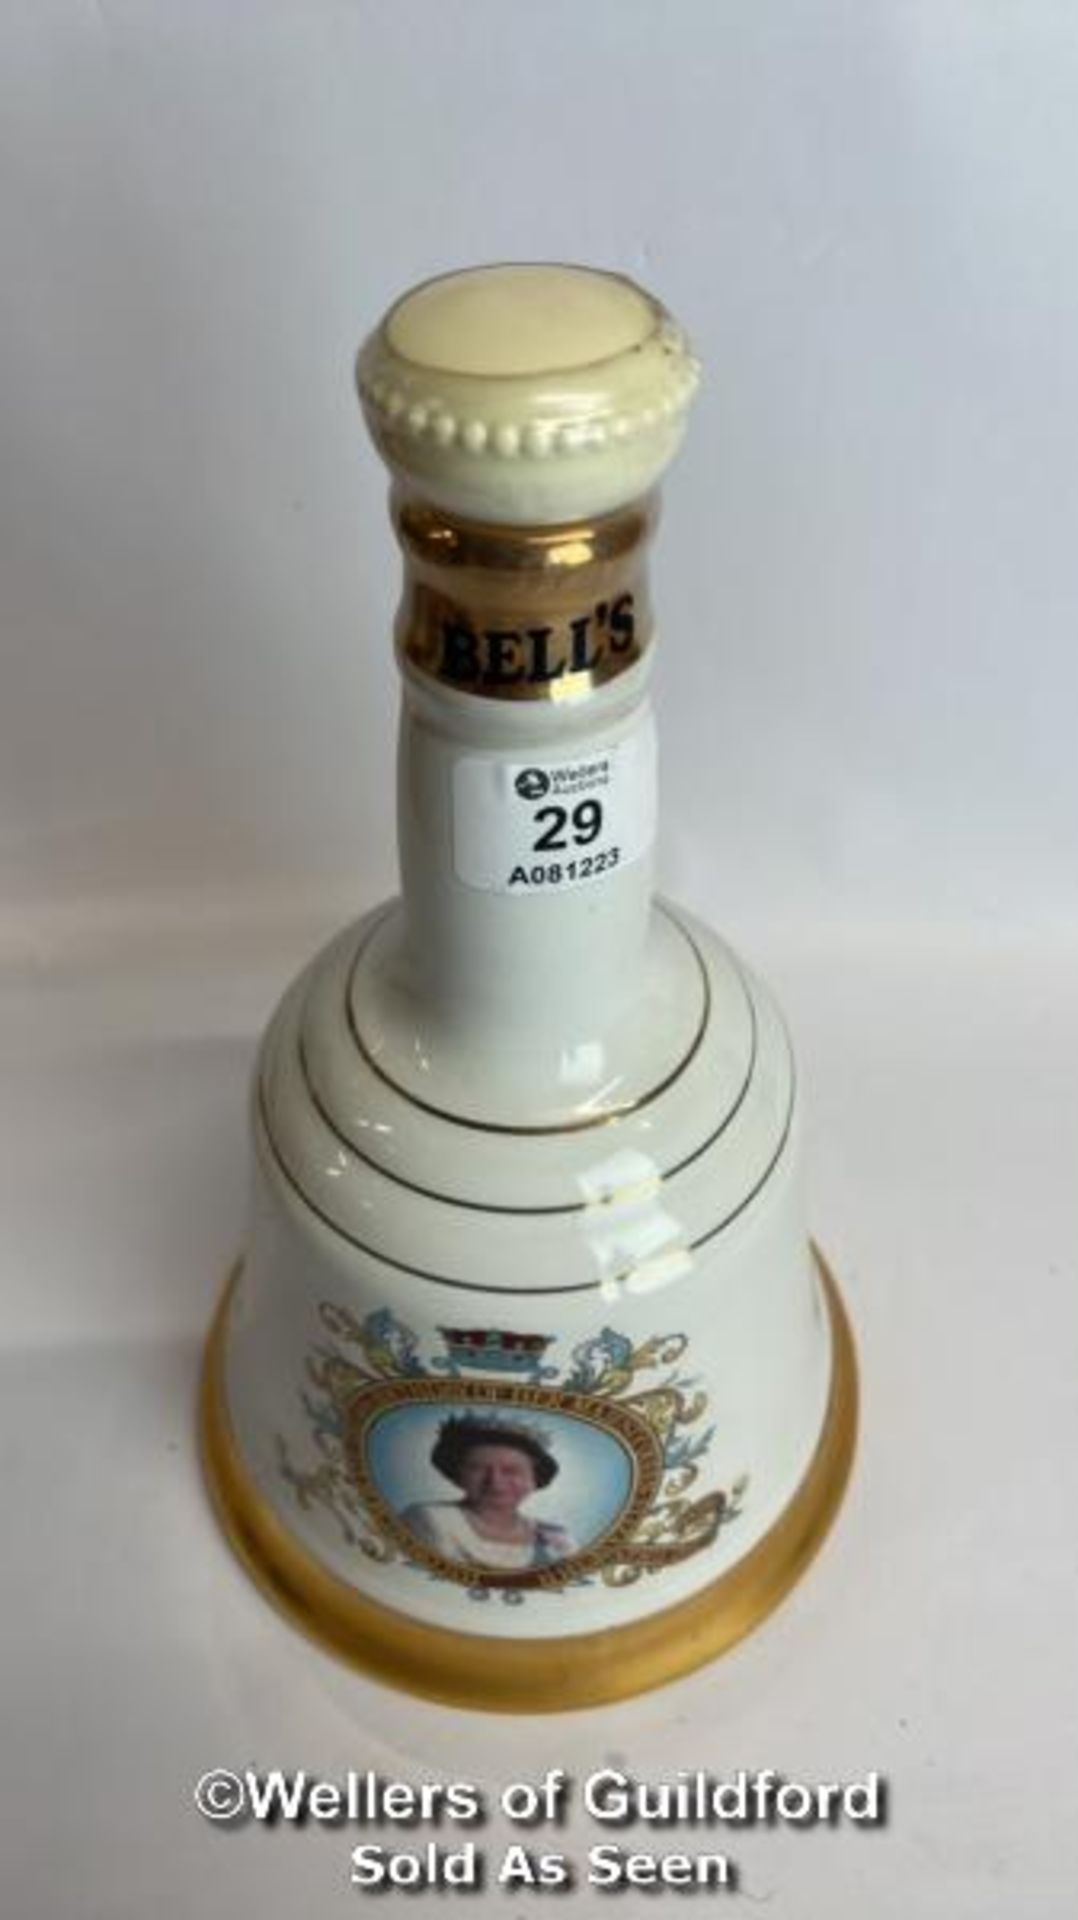 Bell's Scotch Whisky In a Wade Commemortative Decanter Commemortating The 60th Birthday of Her - Image 8 of 10